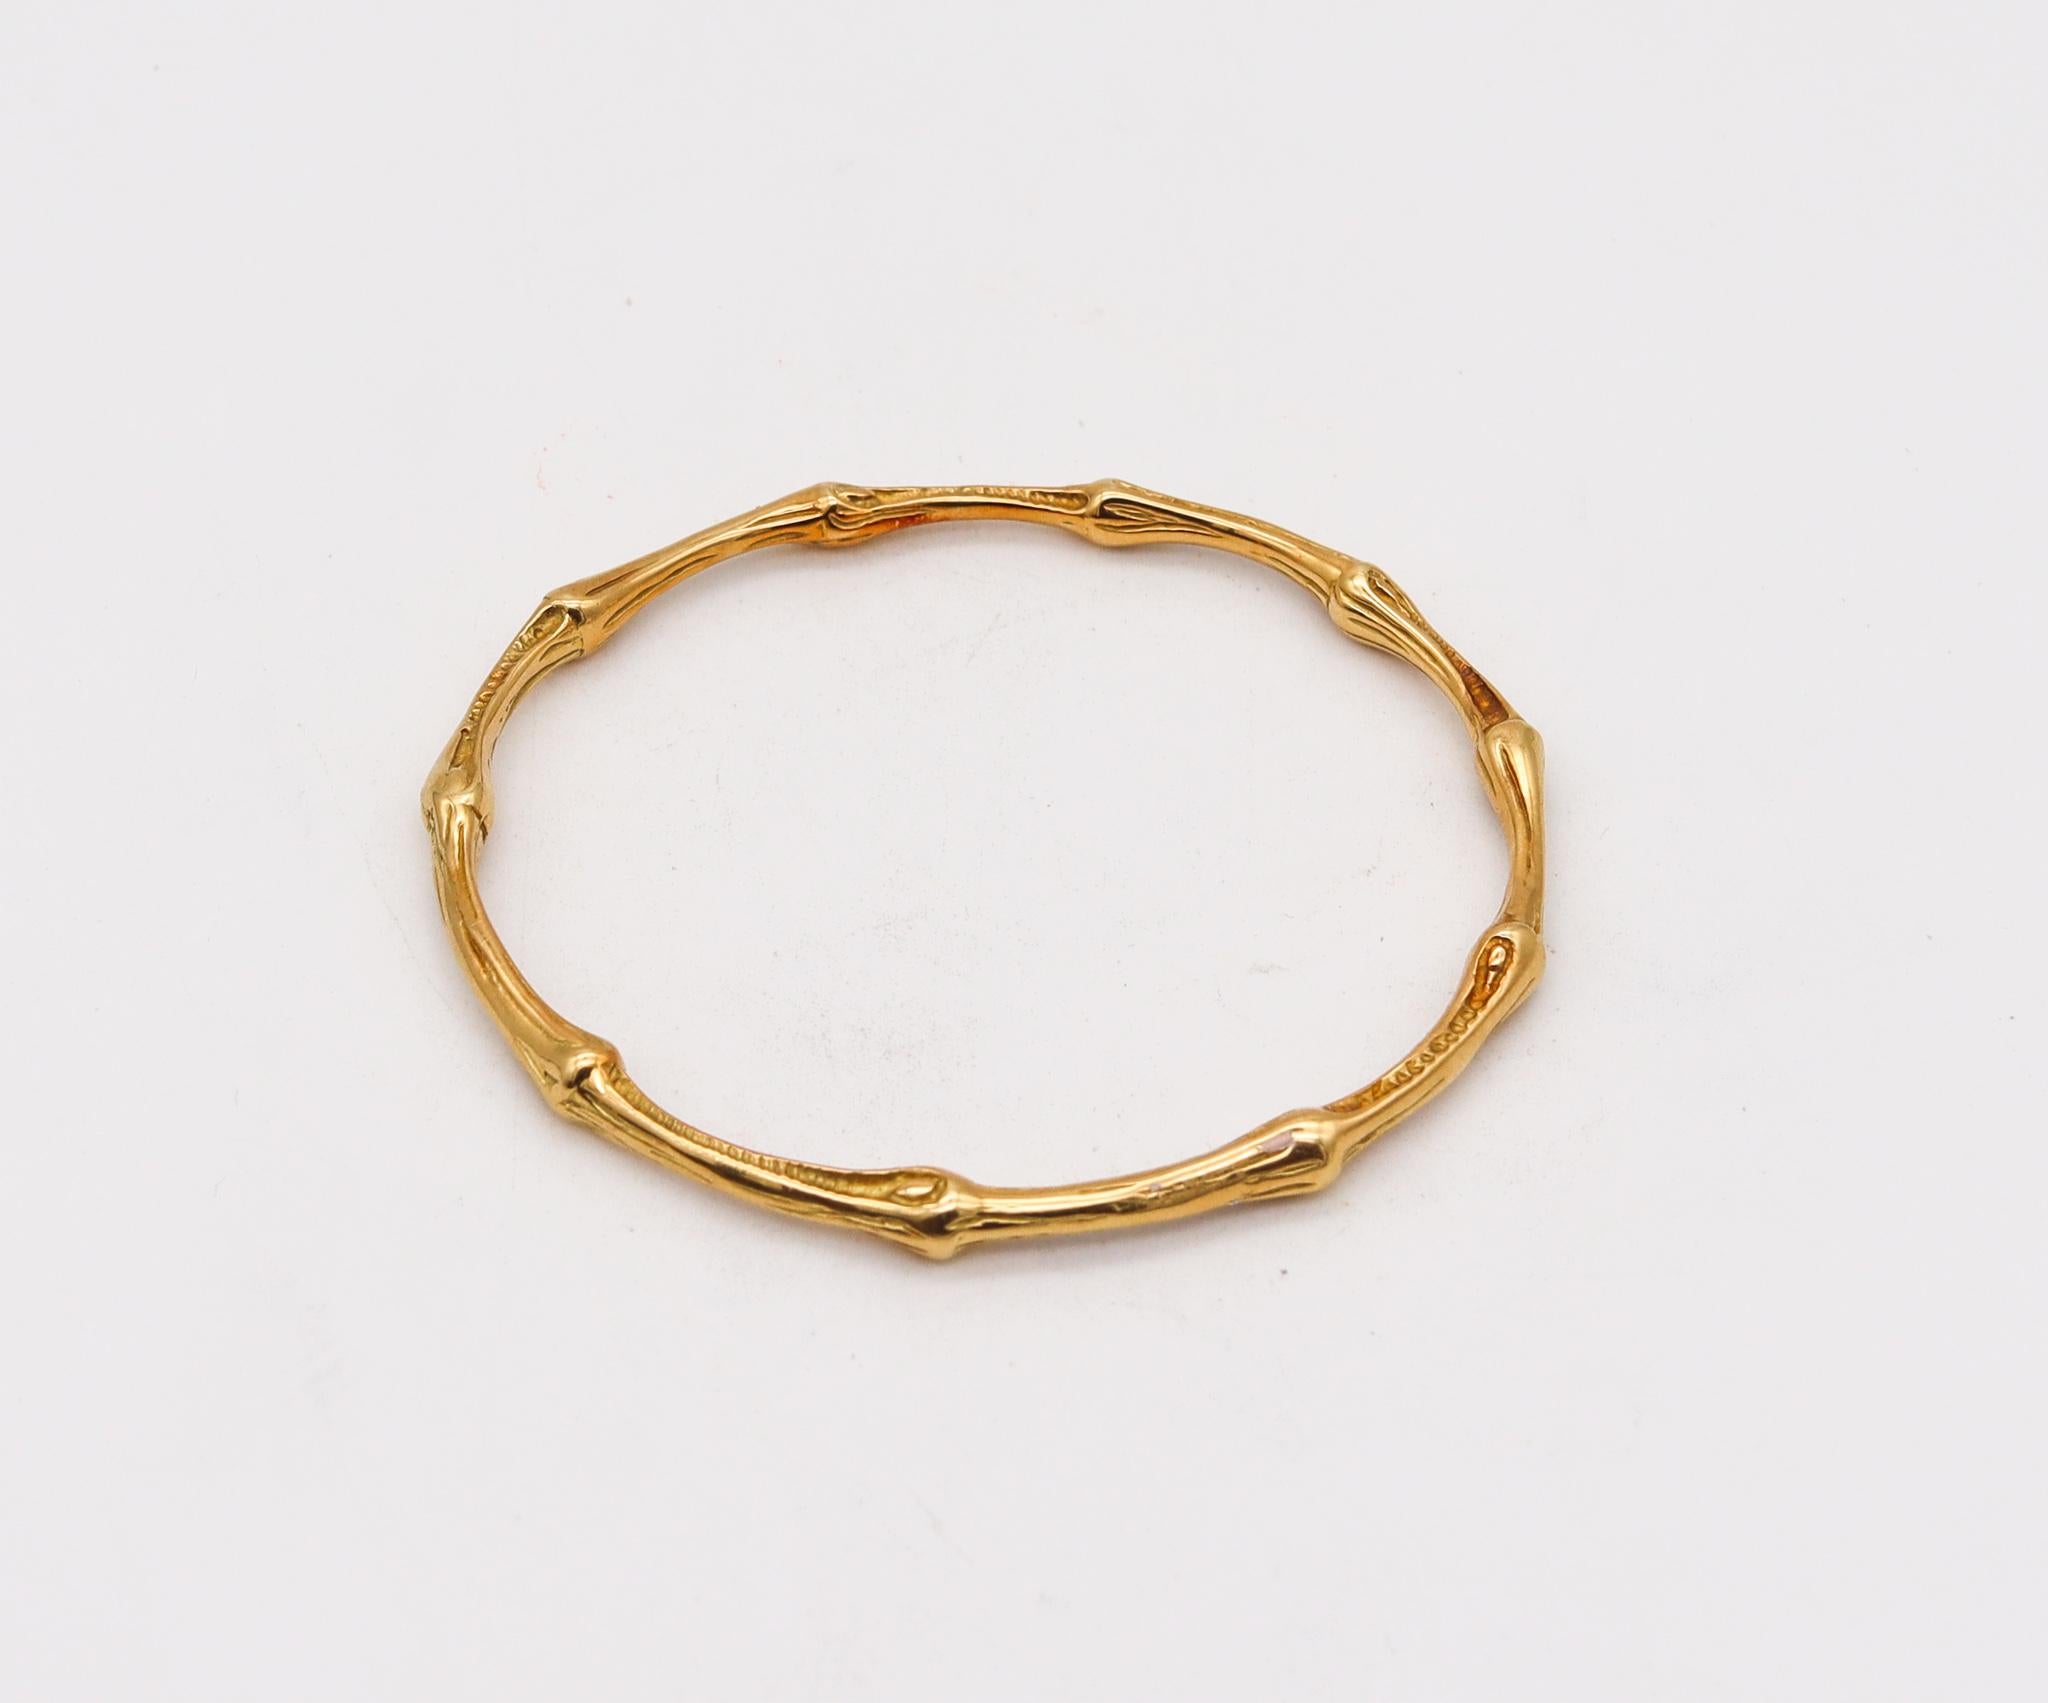 Bamboo slide bangle designed by Tiffany & Co.

Tiffany & Co 18K Gold Bamboo Bangle Bracelet. Circa 1996, crafted from solid 18K yellow gold featuring a bamboo pattern with 10 nodes with even internodal spacing. This model is very rare and extremely